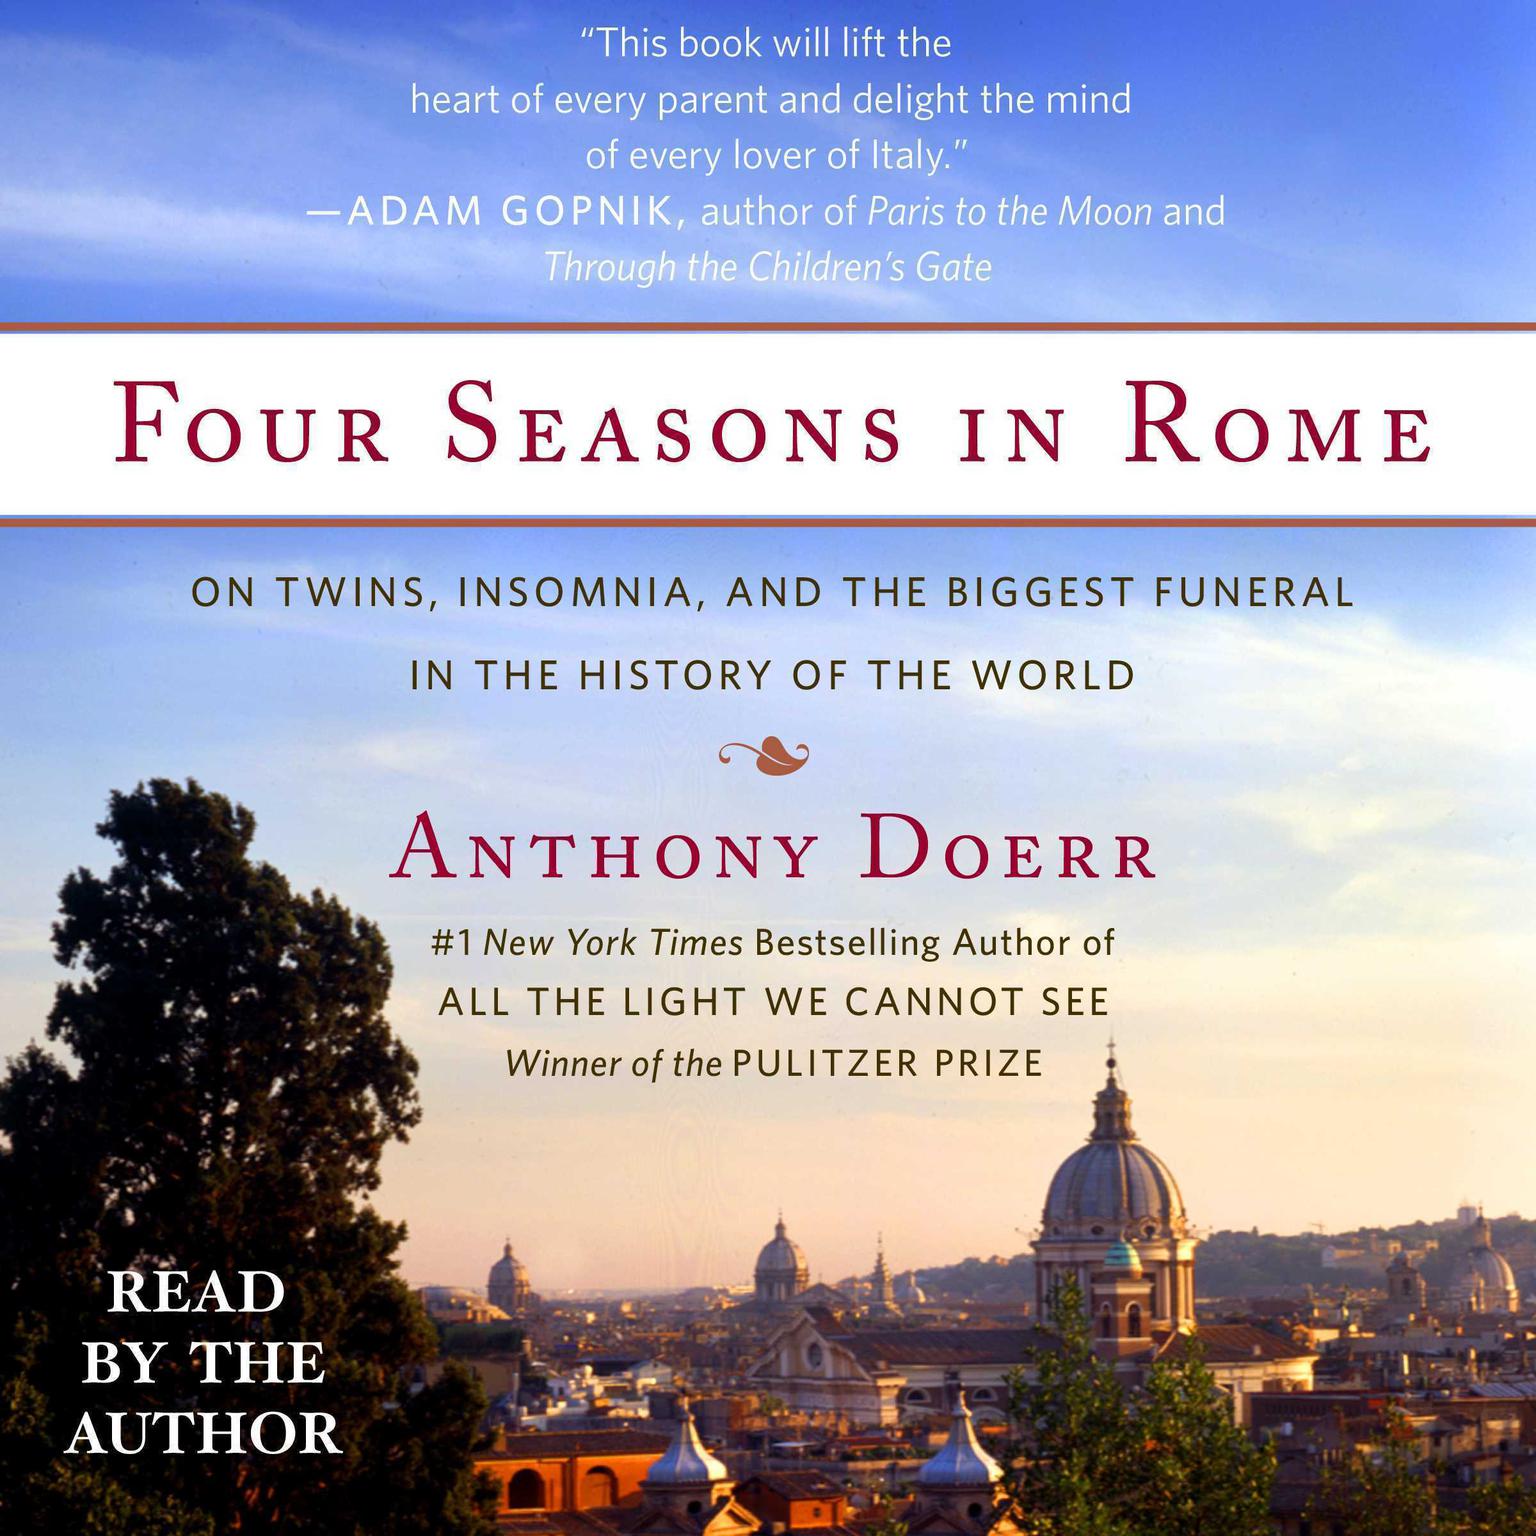 Four Seasons in Rome: On Twins, Insomnia, and the Biggest Funeral in the History of the World Audiobook, by Anthony Doerr